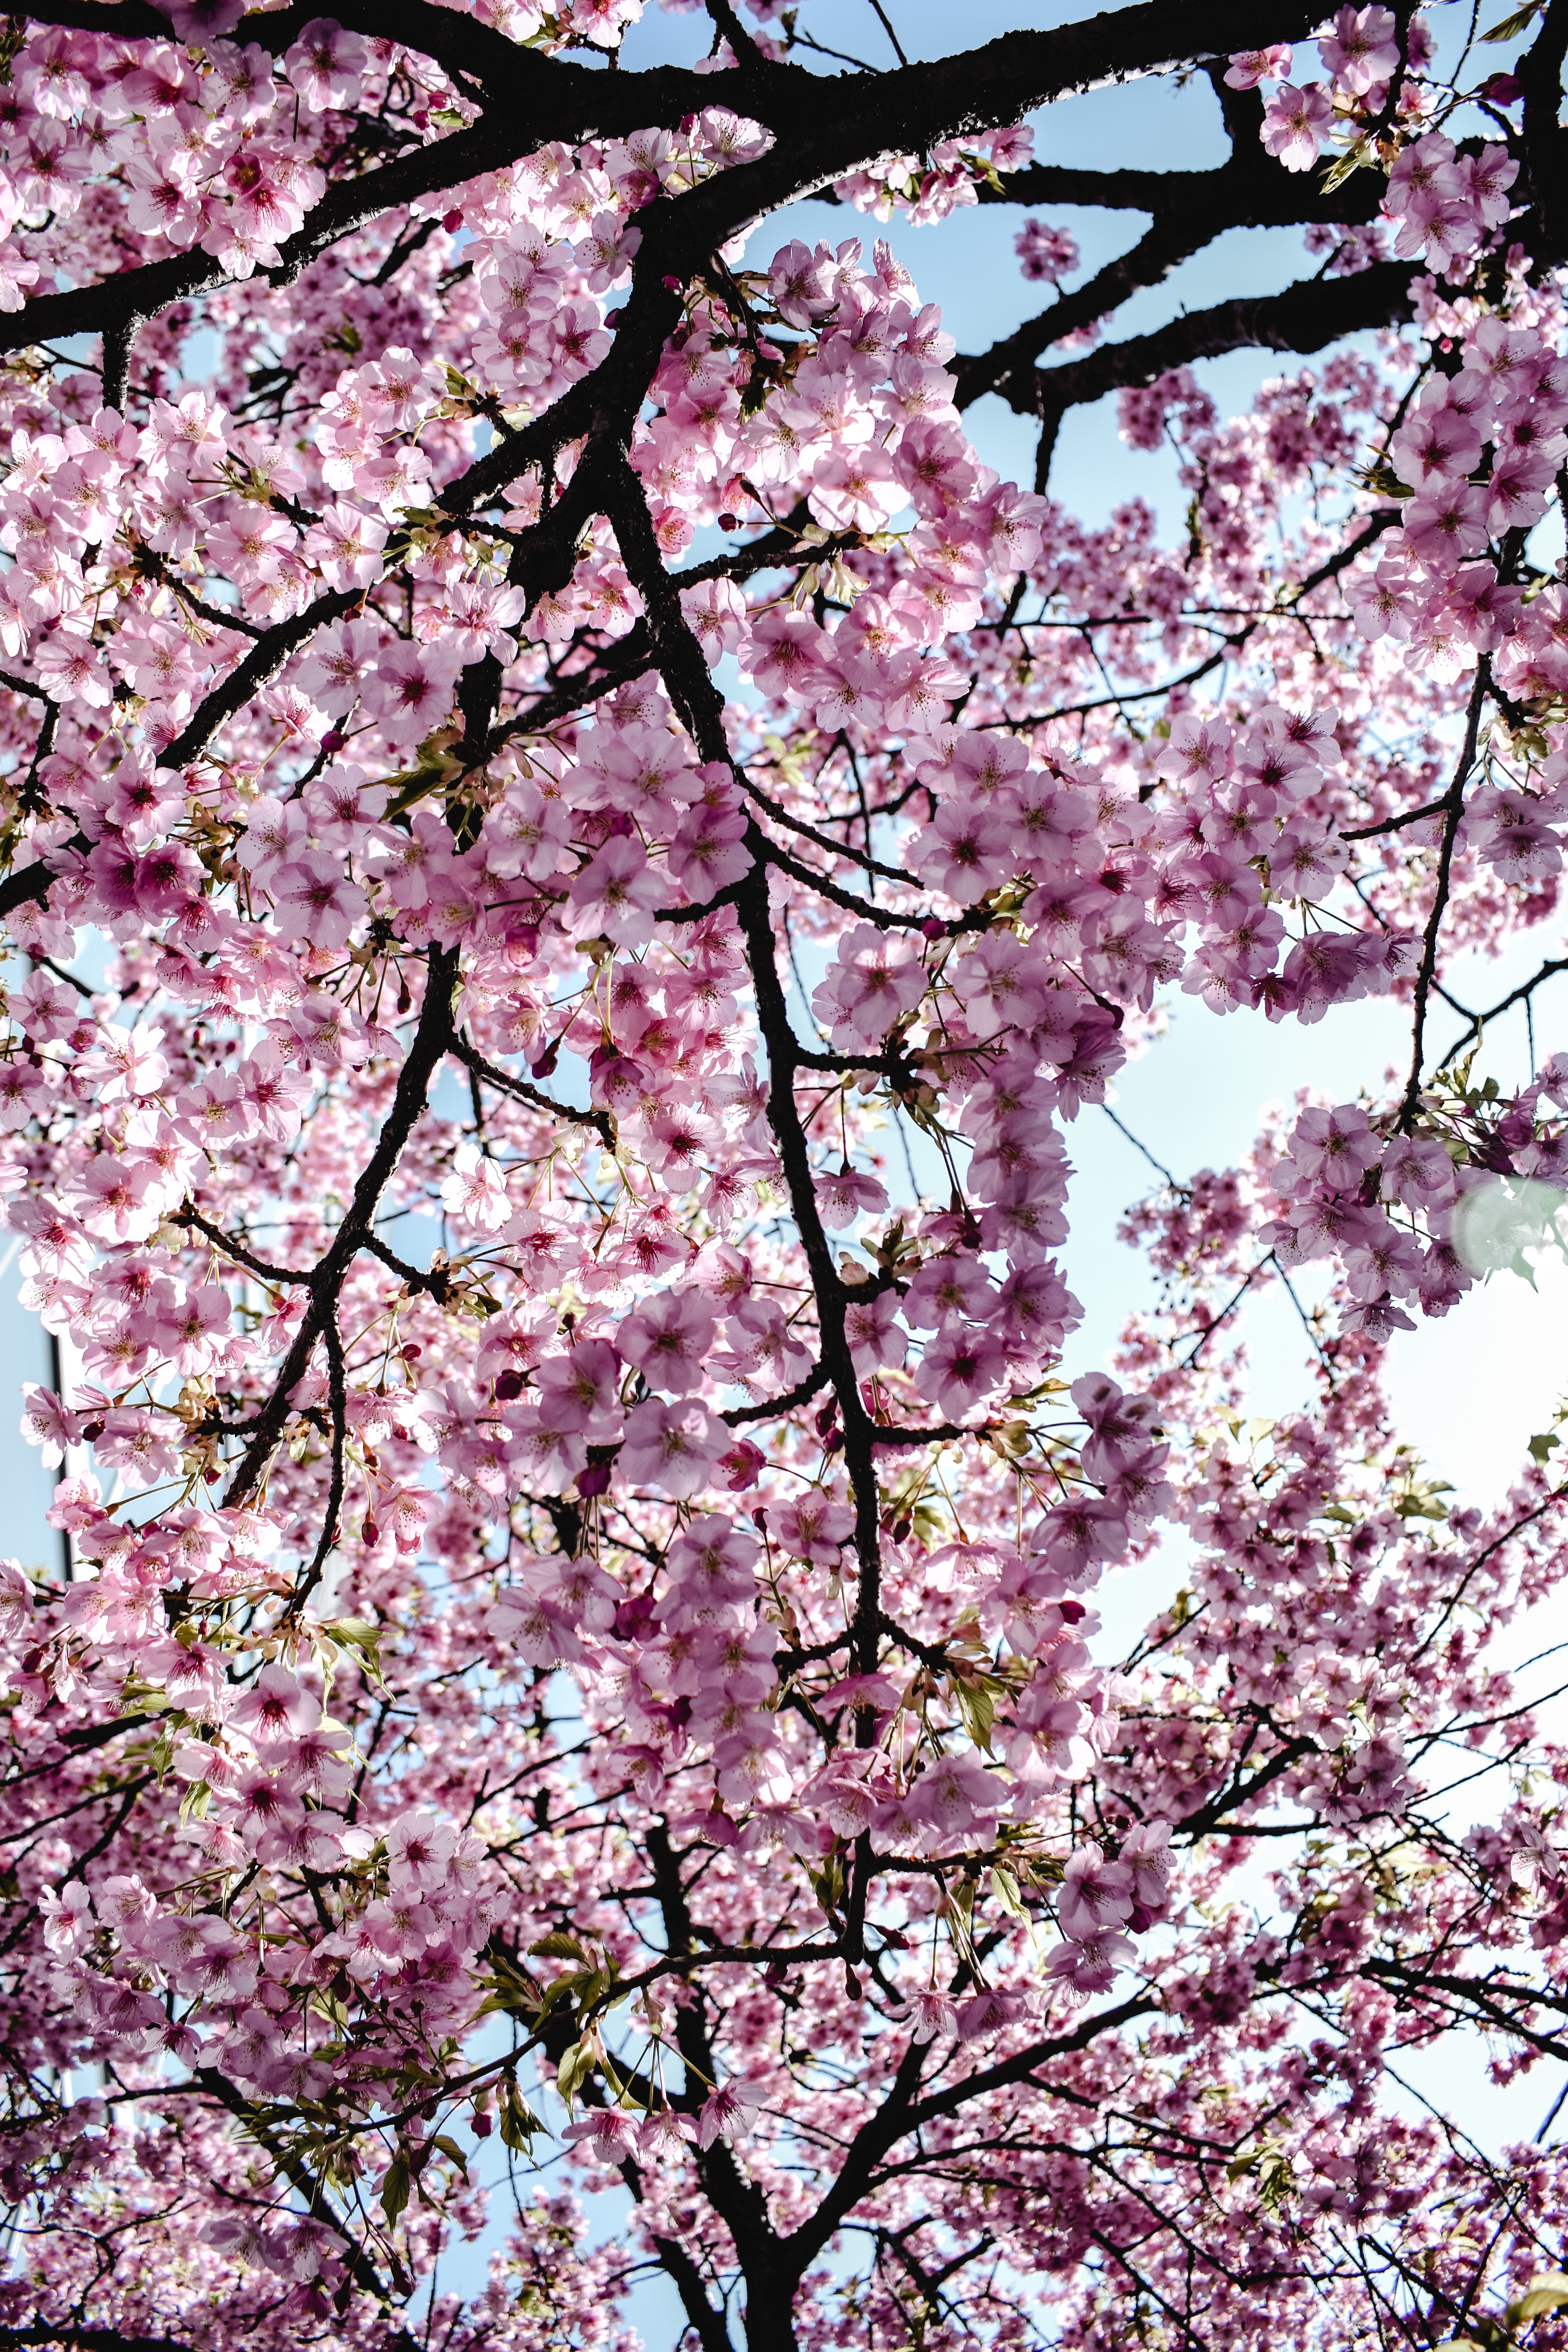 Cherry blossom wallpaper photos download the best free cherry blossom wallpaper stock photos hd images